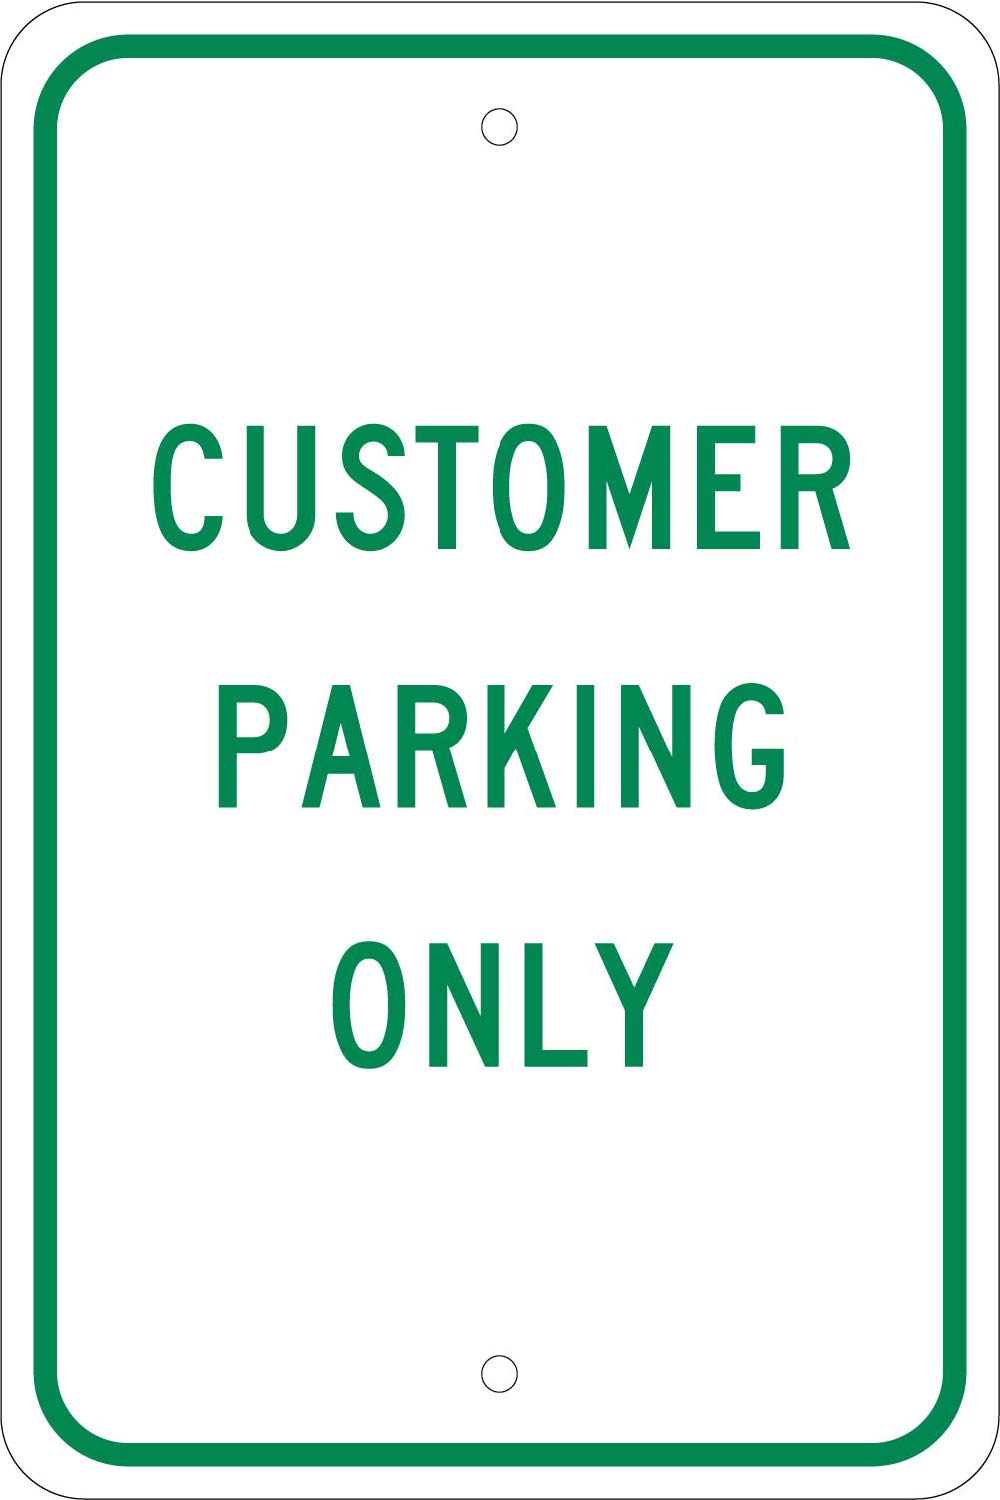 Customer Parking Only Sign-eSafety Supplies, Inc